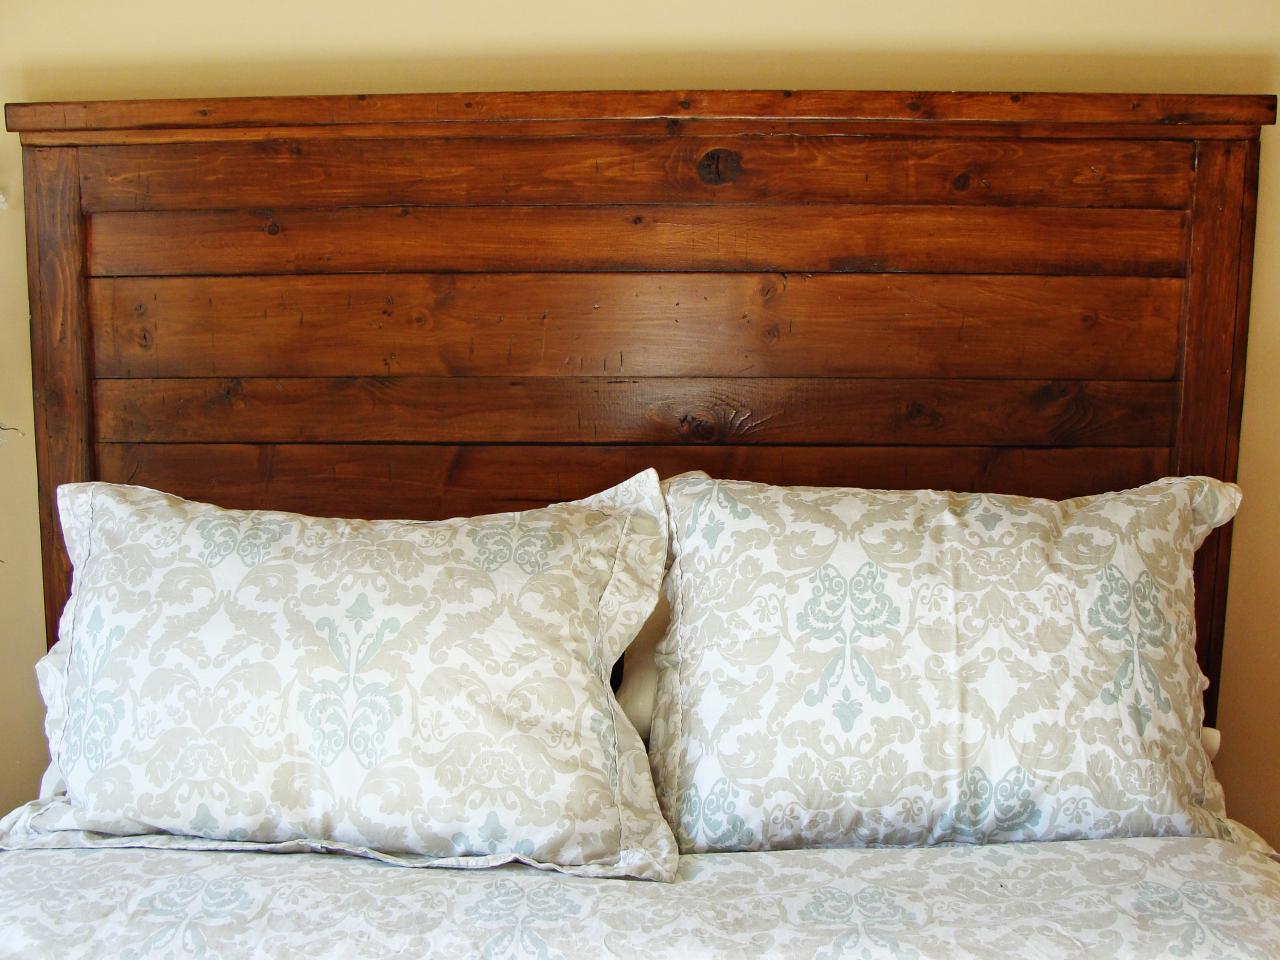 How To Build A Rustic Wood Headboard, Rustic Queen Bed Frame Diy